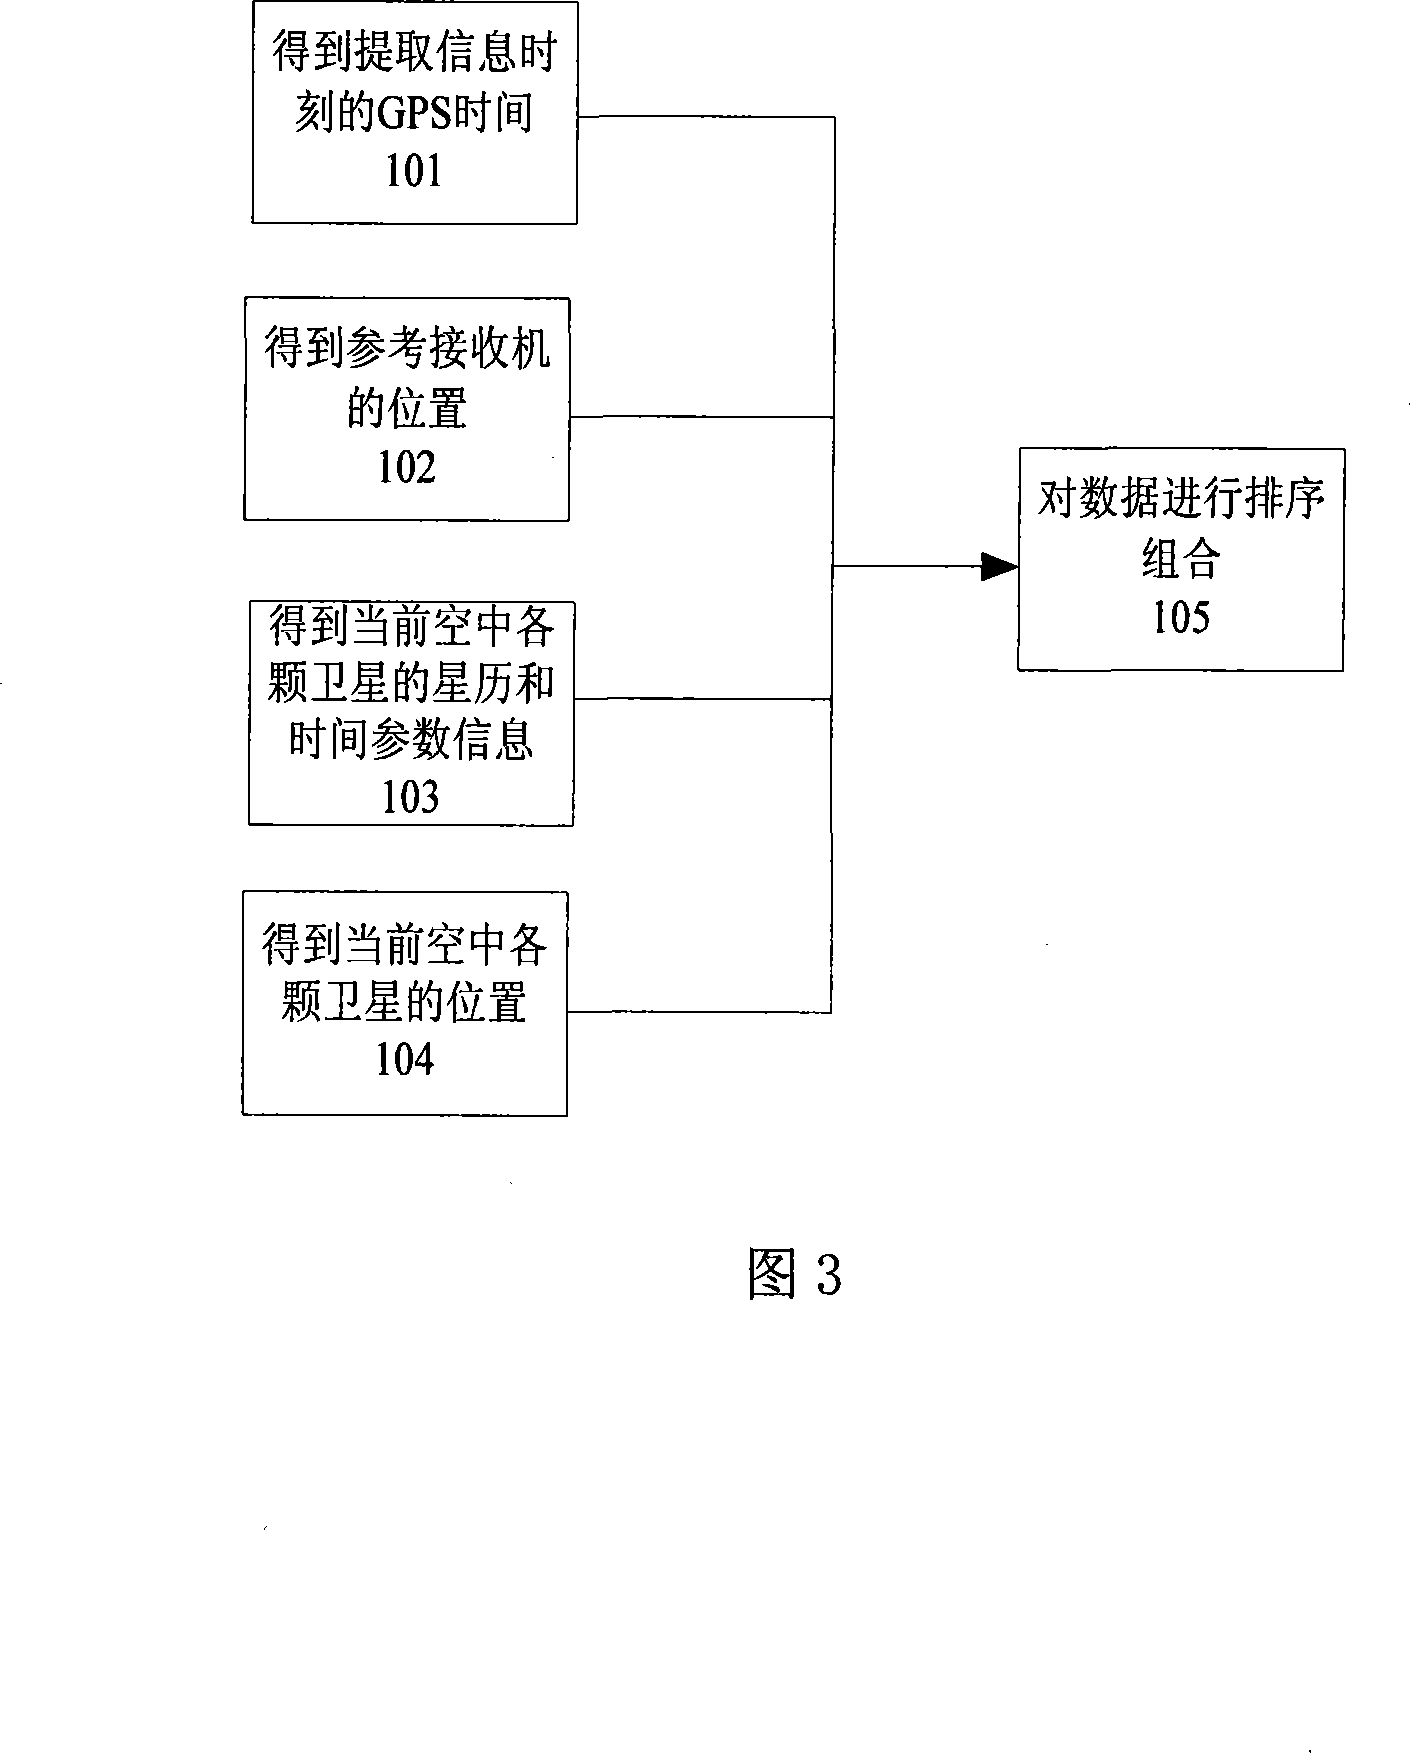 High sensitivity auxiliary positioning system and data processing method thereof